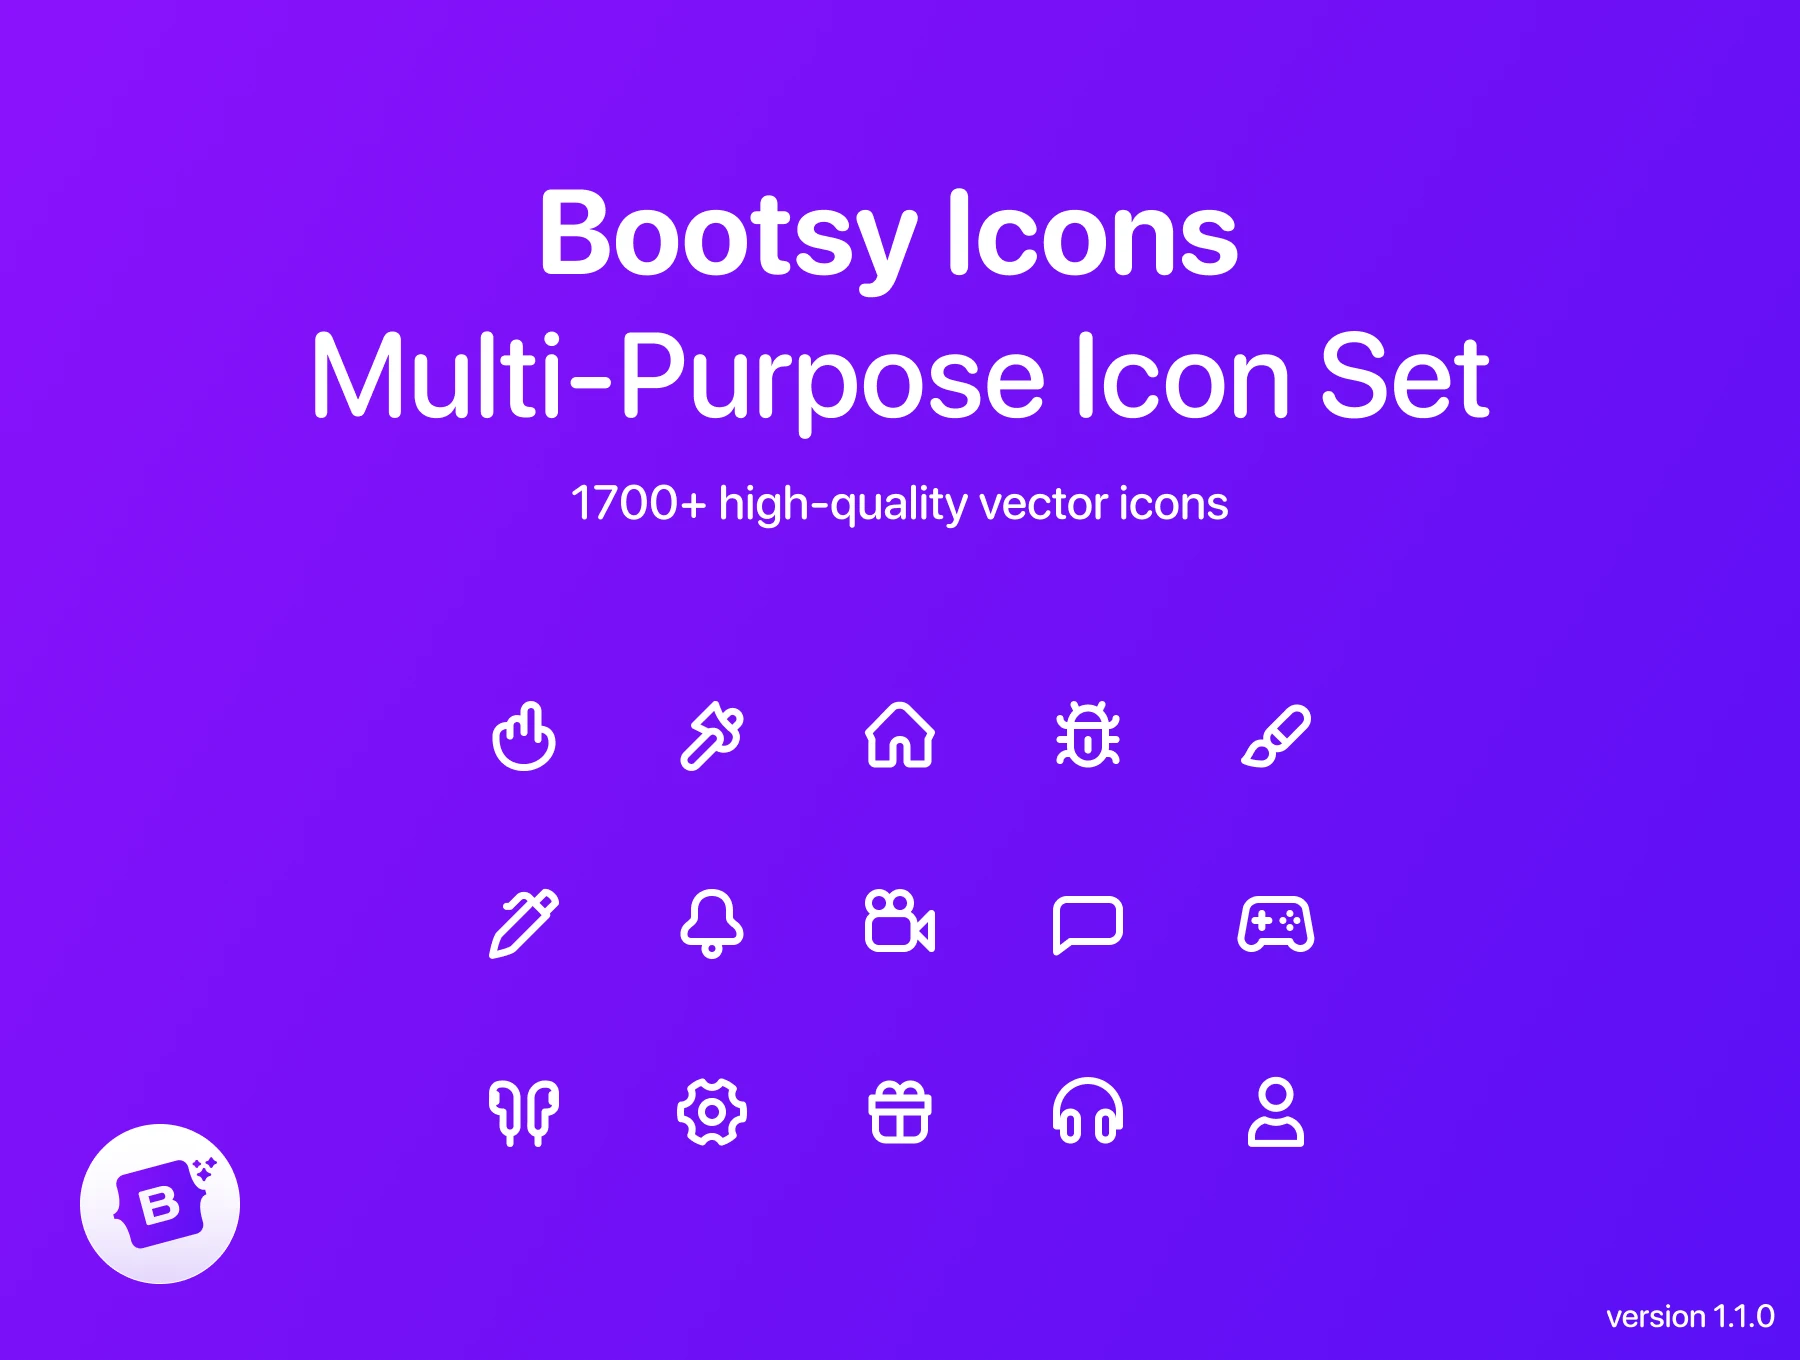 1700 icon - Bootsy 1.1 + Duotone icons set for Figma and Adobe XD